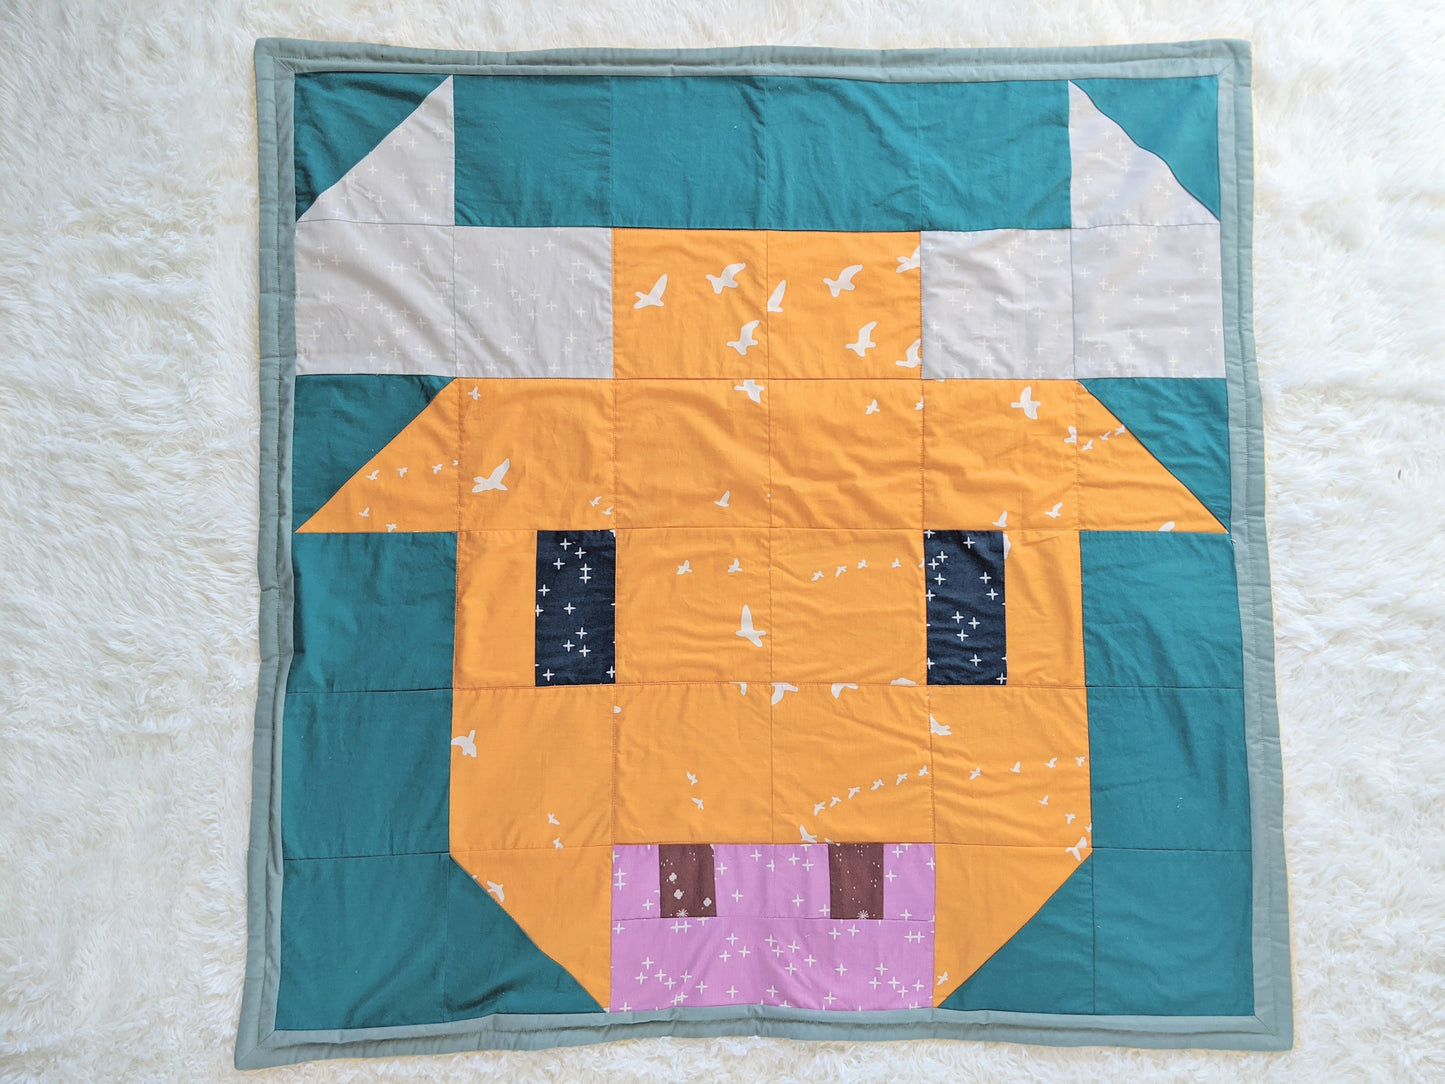 Baby Peipei- 2021: Year of the Ox, backed with Butter Furry Sherpa. An ox quilt pattern made up of square, triangle, and rectangular patches.